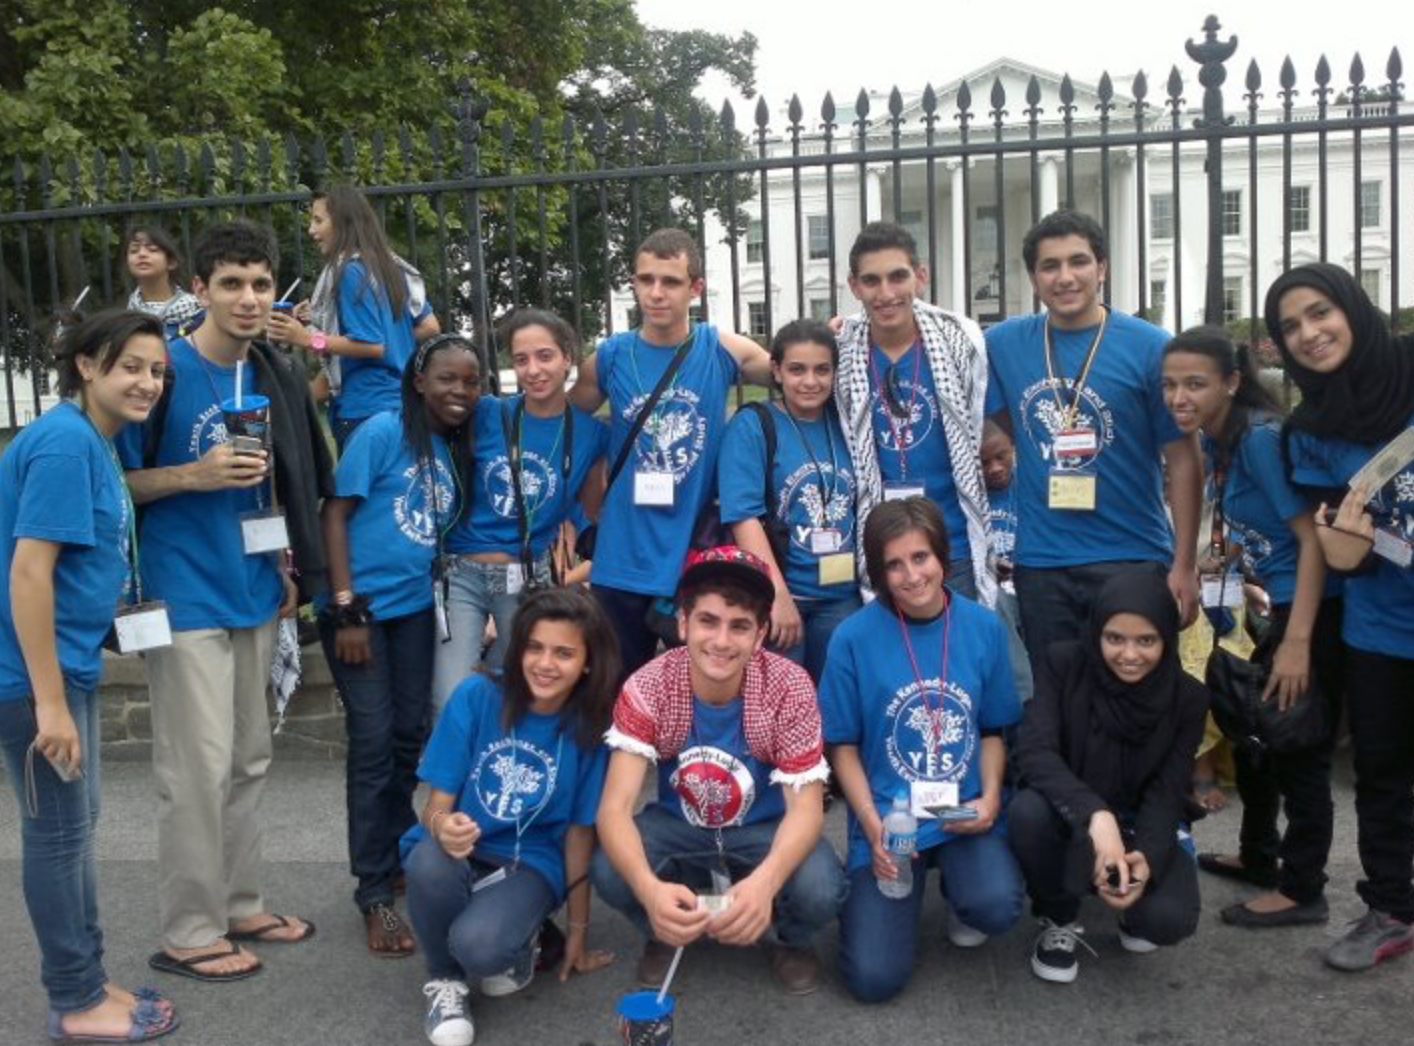 Students Wearing Yes Shirts Posing In From The The White House